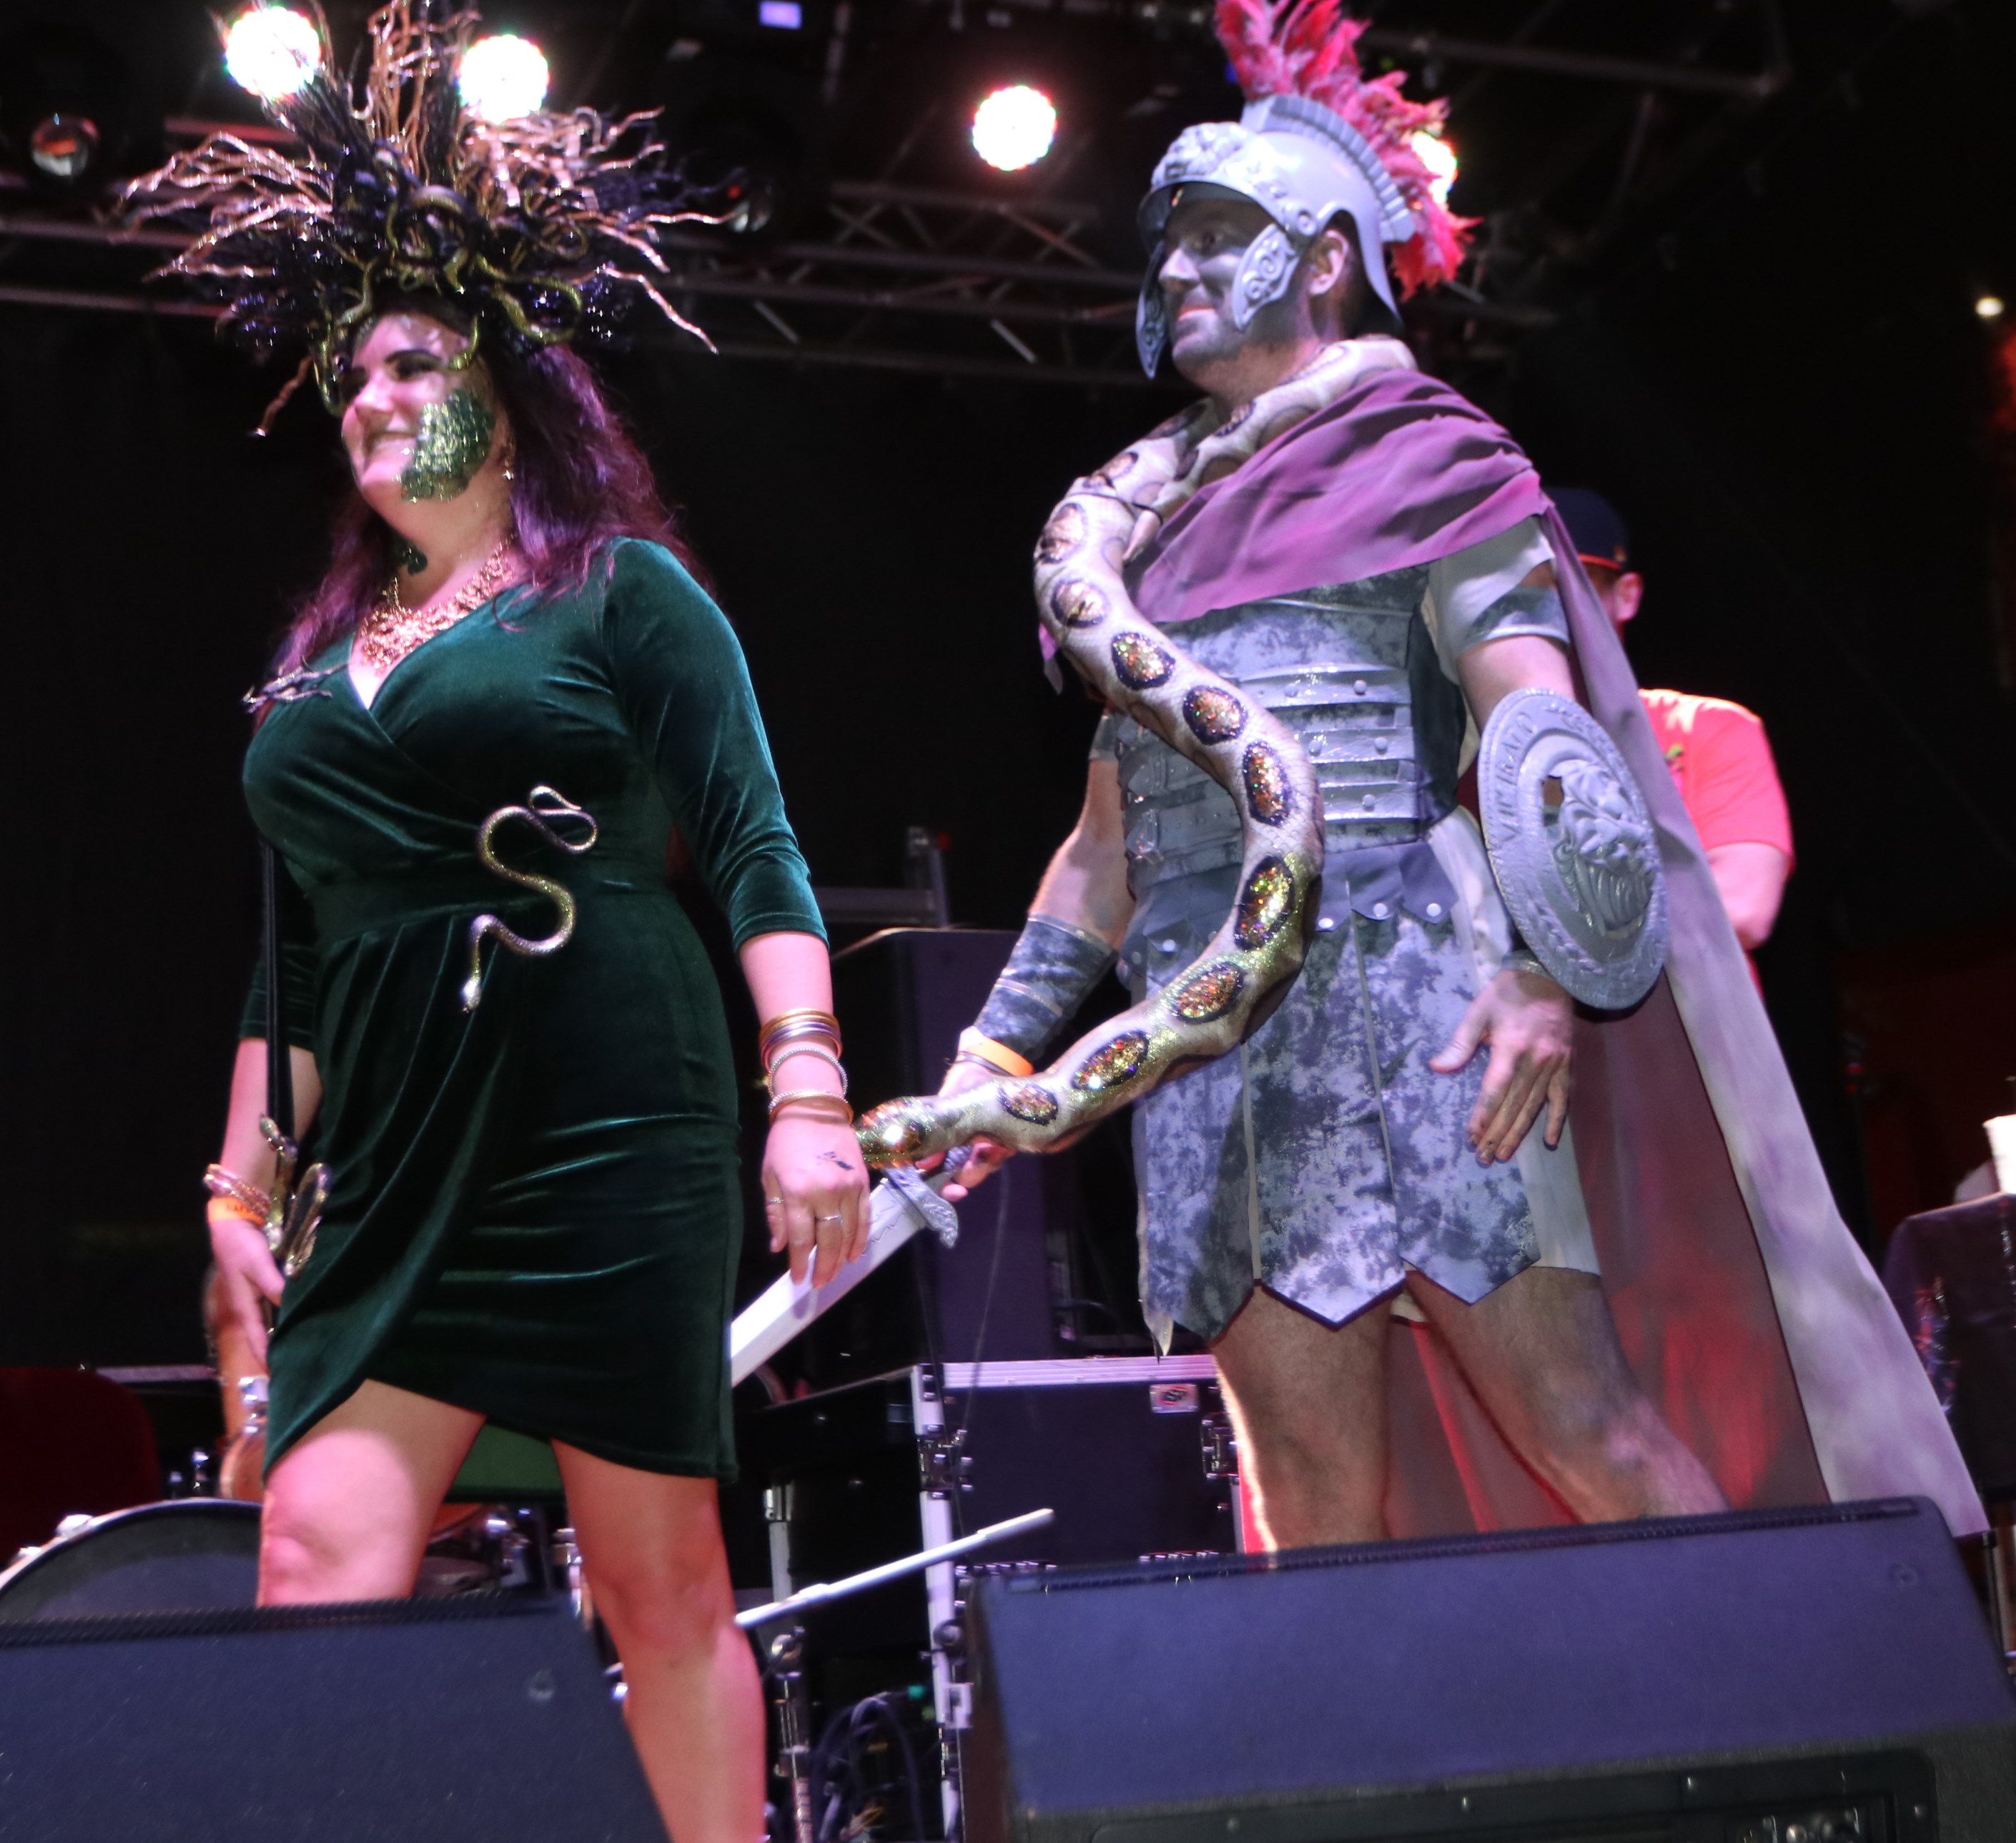 Medusa and Stone shaped like a Roman Solider  at Moonfest 2019 Costume Contest (photo by: Mike Jalches)